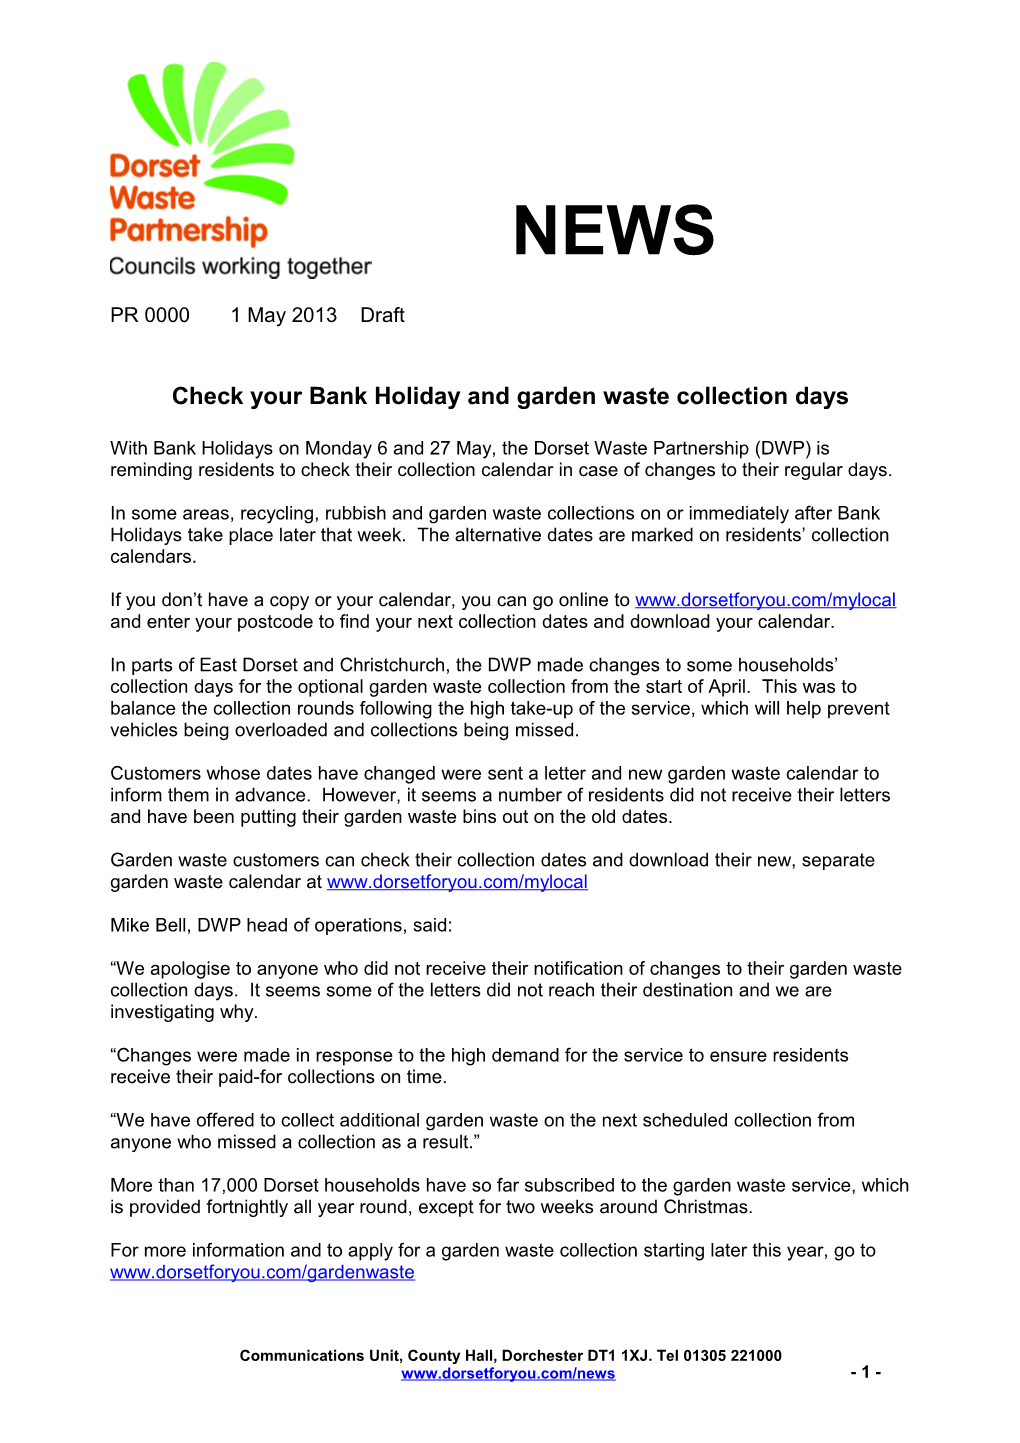 Check Your Bank Holiday and Garden Waste Collection Days